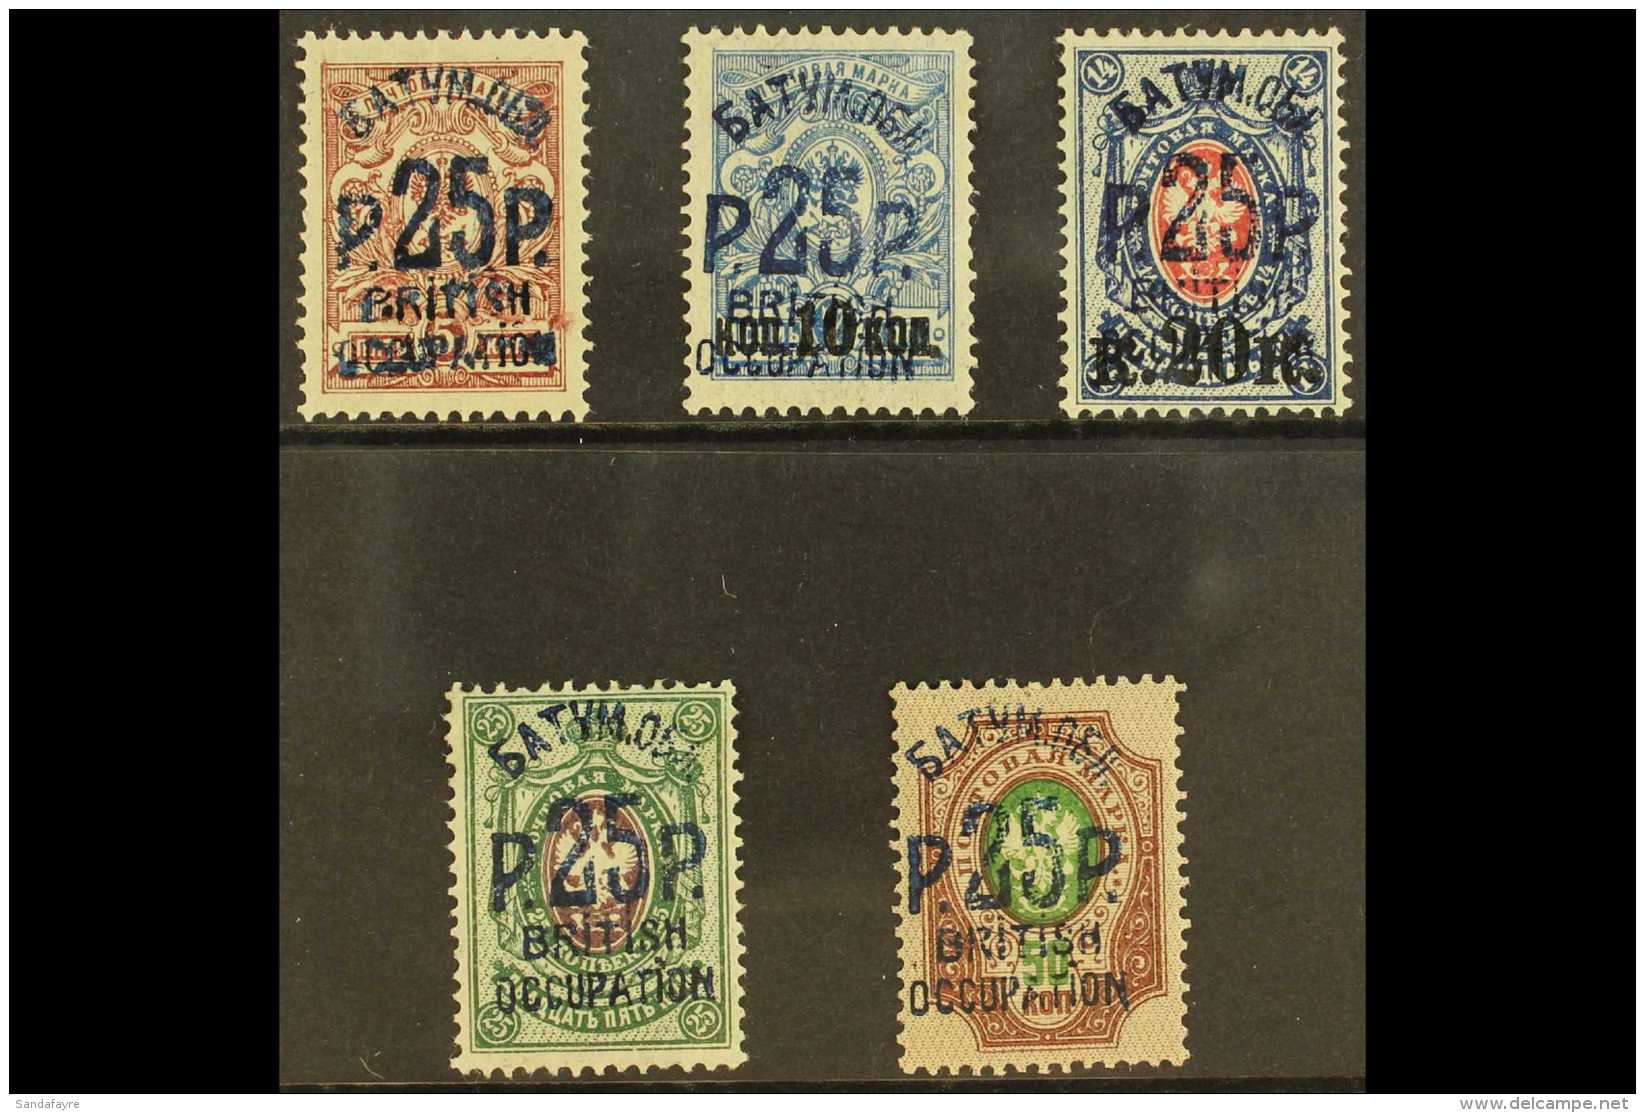 1920 25r Surcharges In BLUE, SG 29a/33a, Very Fine And Fresh Mint. All Expertised Kohler And Dr Jem. (5 Stamps)... - Batum (1919-1920)